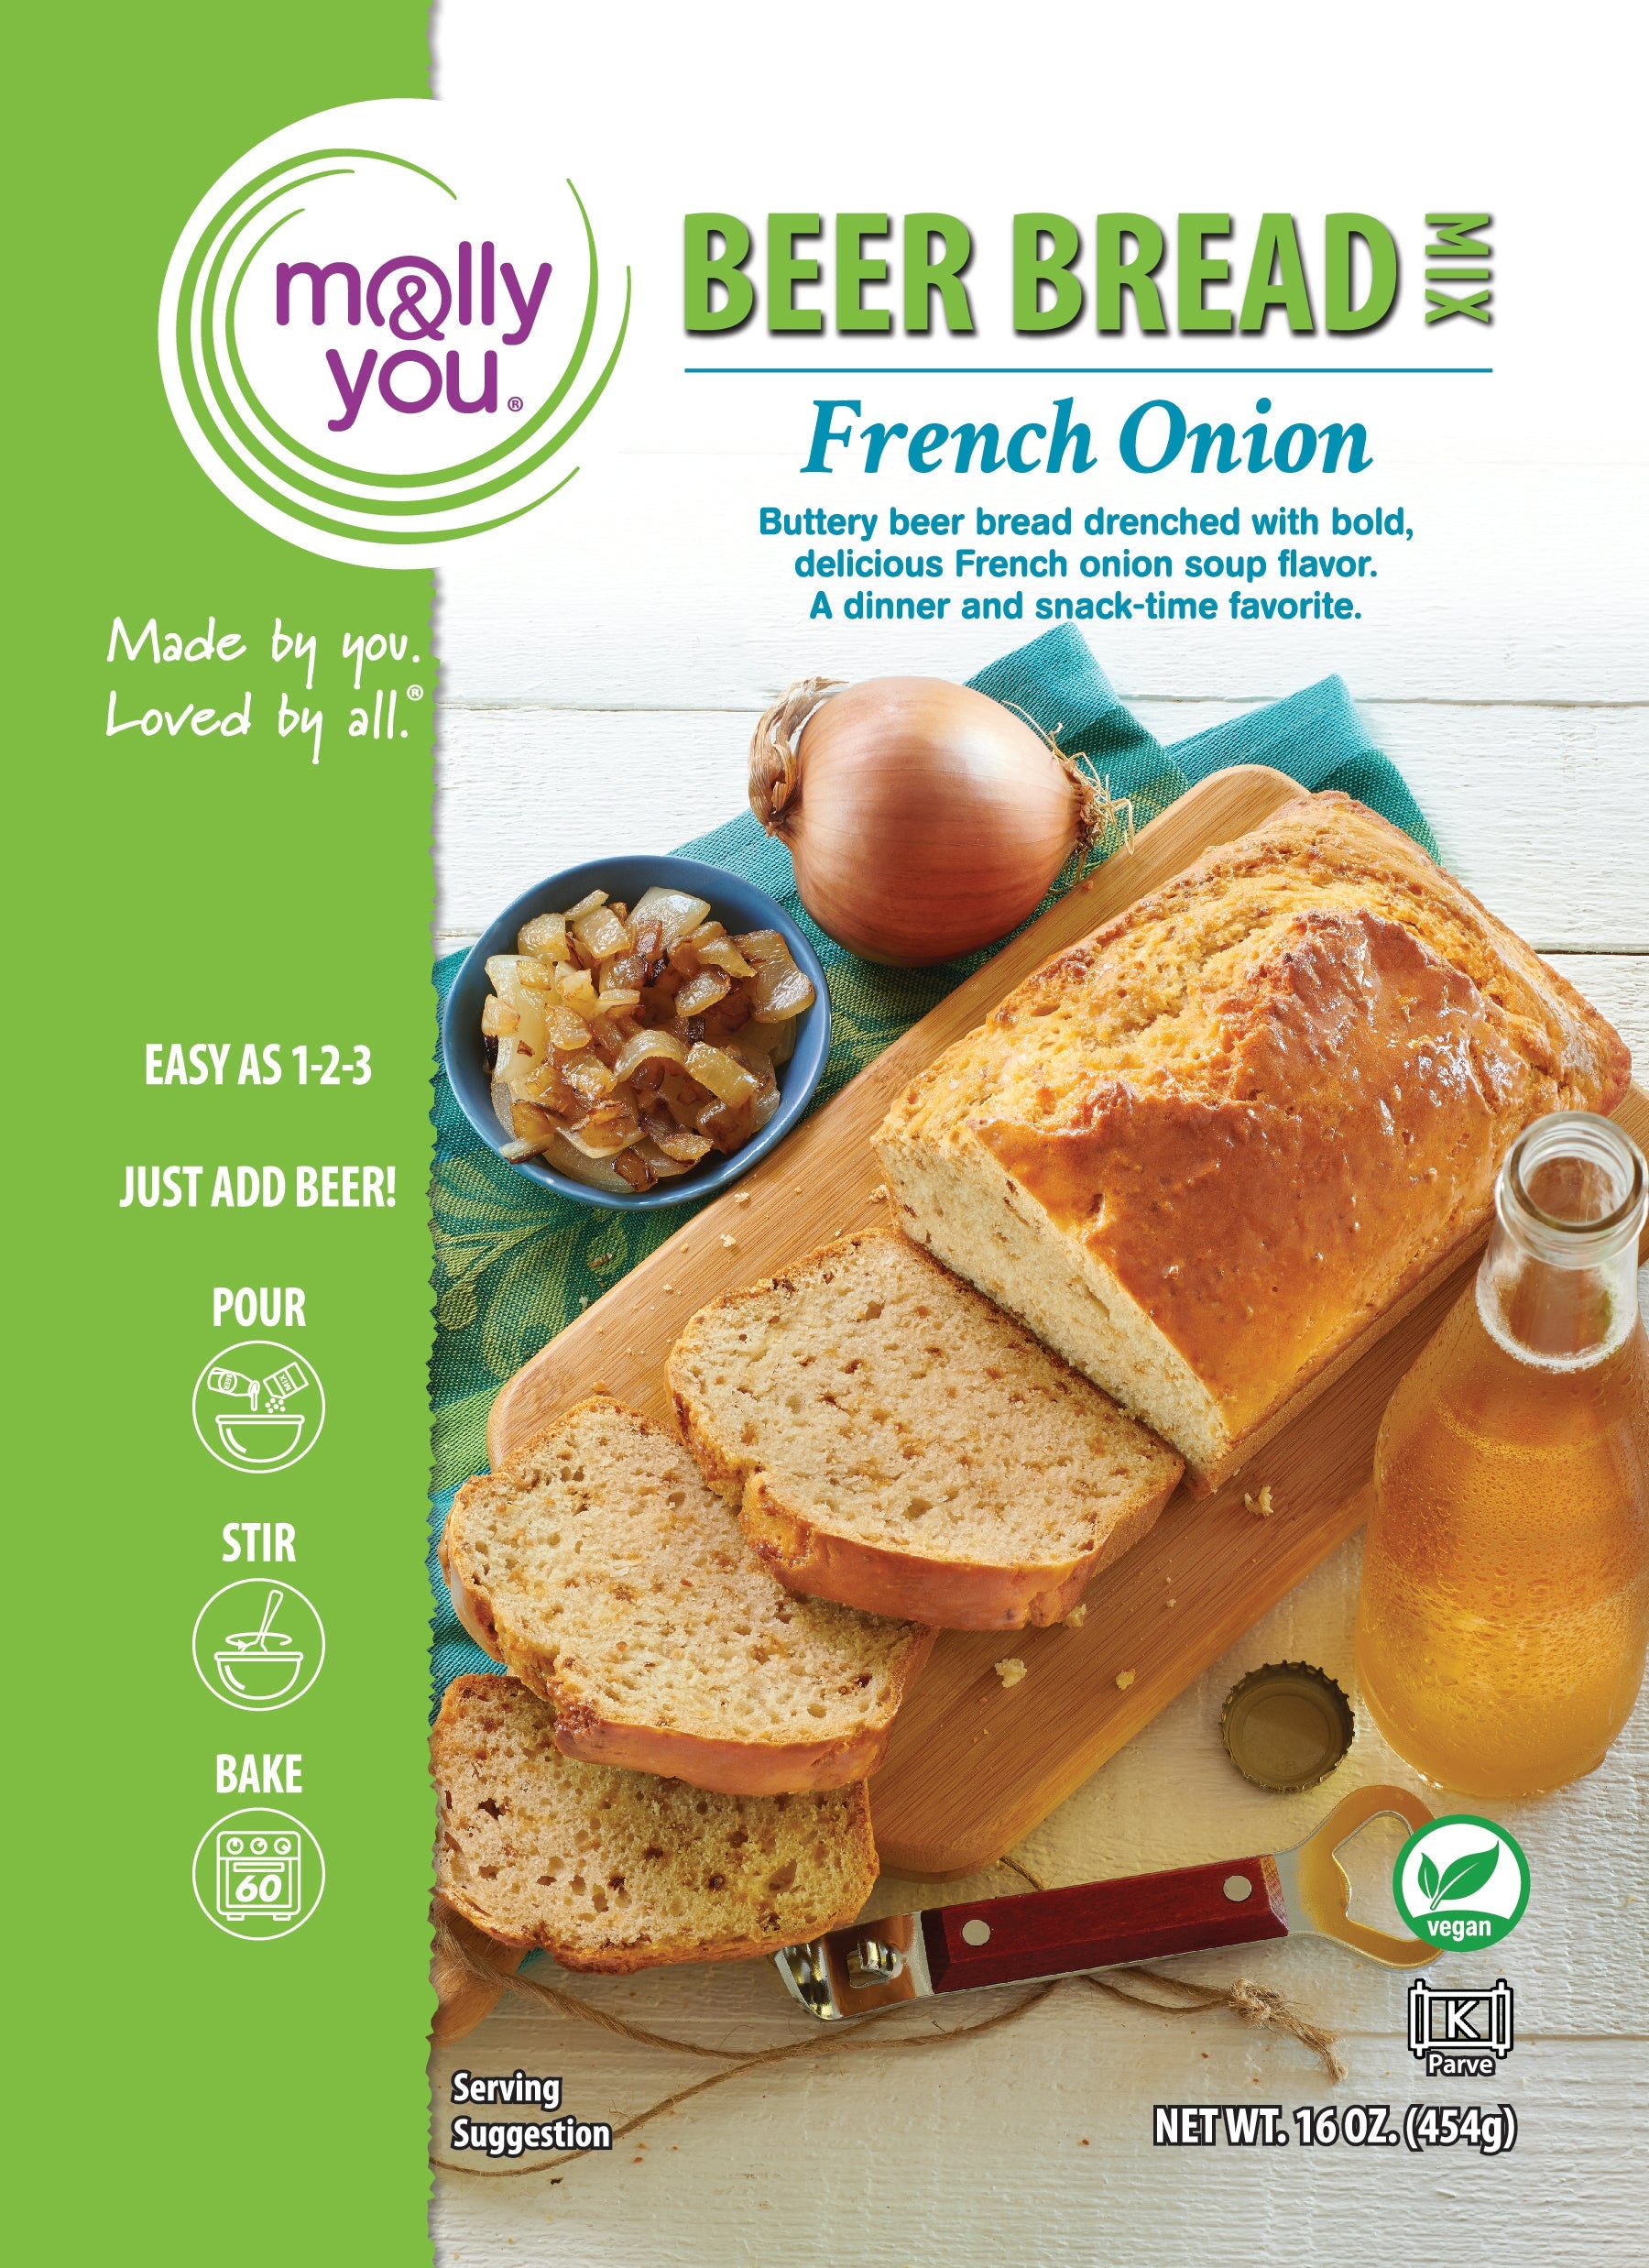 French Onion Beer Bread Mix